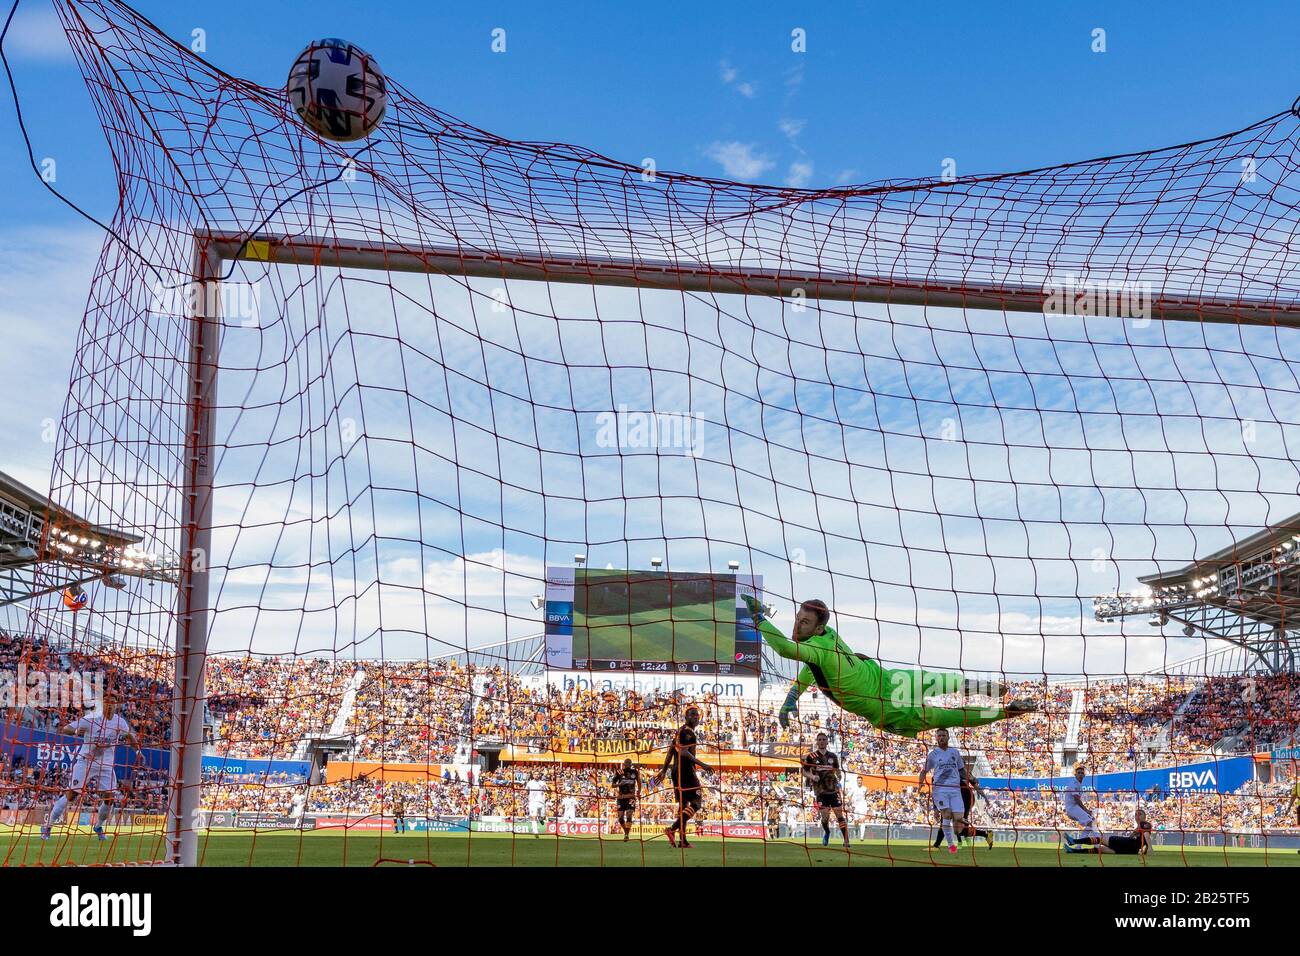 Houston, Texas, USA. 29th Feb, 2020. Los Angeles Galaxy forward Cristian Pavon (10) takes the shot and scores as Houston Dynamo goalkeeper Marko Maric (1) jumps up for the save but the ball is just out of reach at BBVA Stadium in Houston, Texas. Maria Lysaker/CSM/Alamy Live News Stock Photo